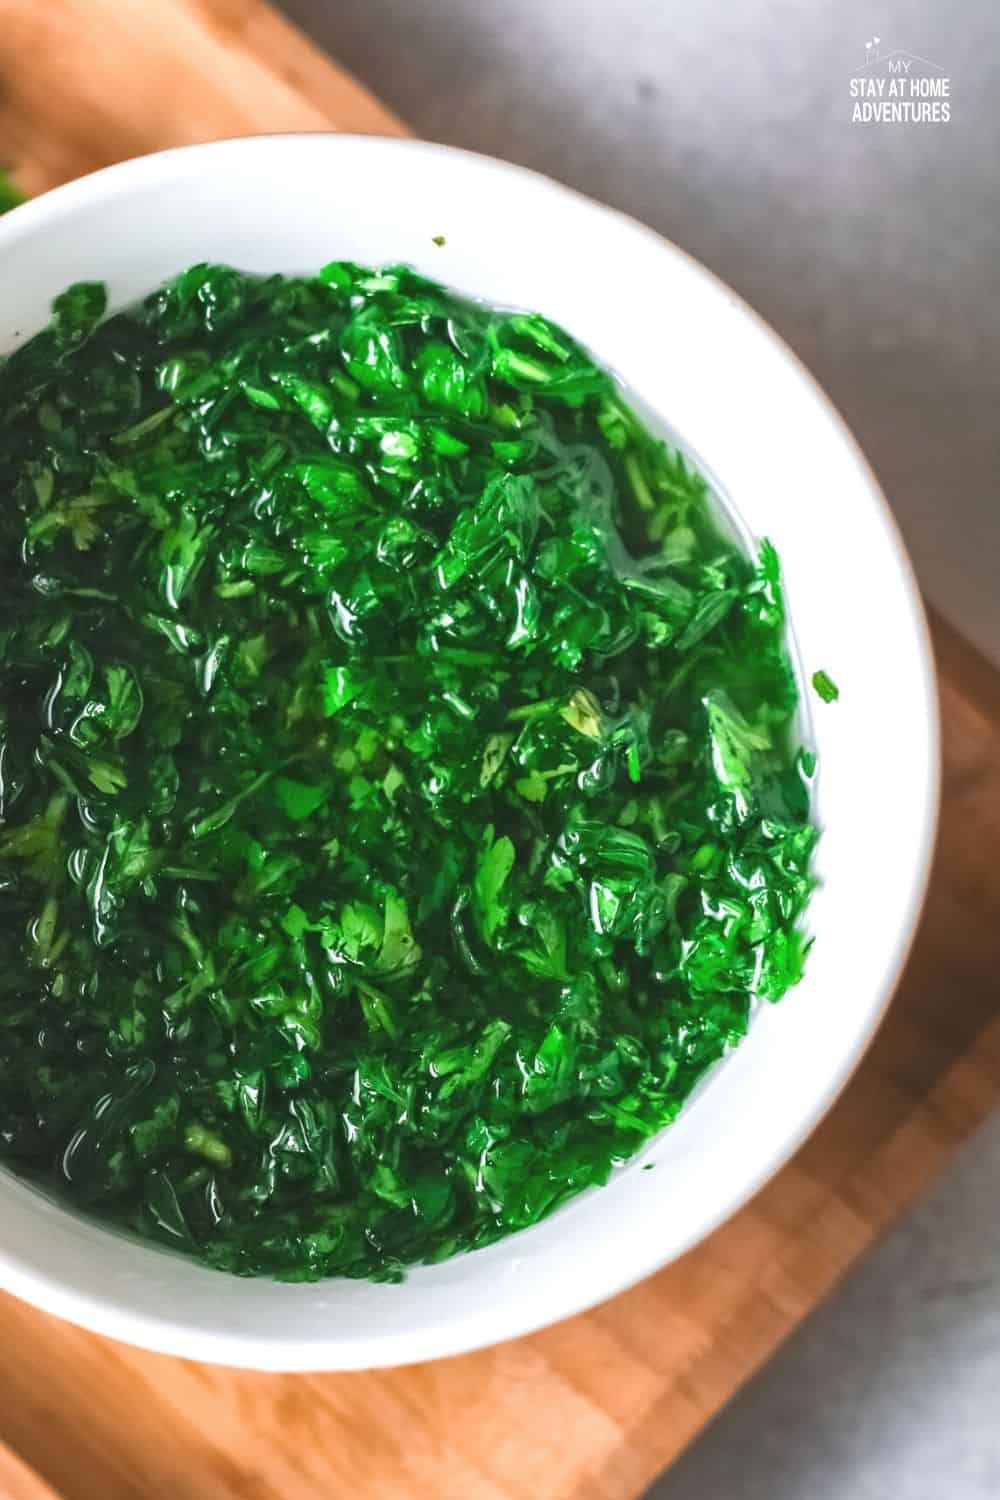 When it comes to condiments, chimichurri is a versatile sauce that can be used in many ways. Learn how to create this recipe today! via @mystayathome